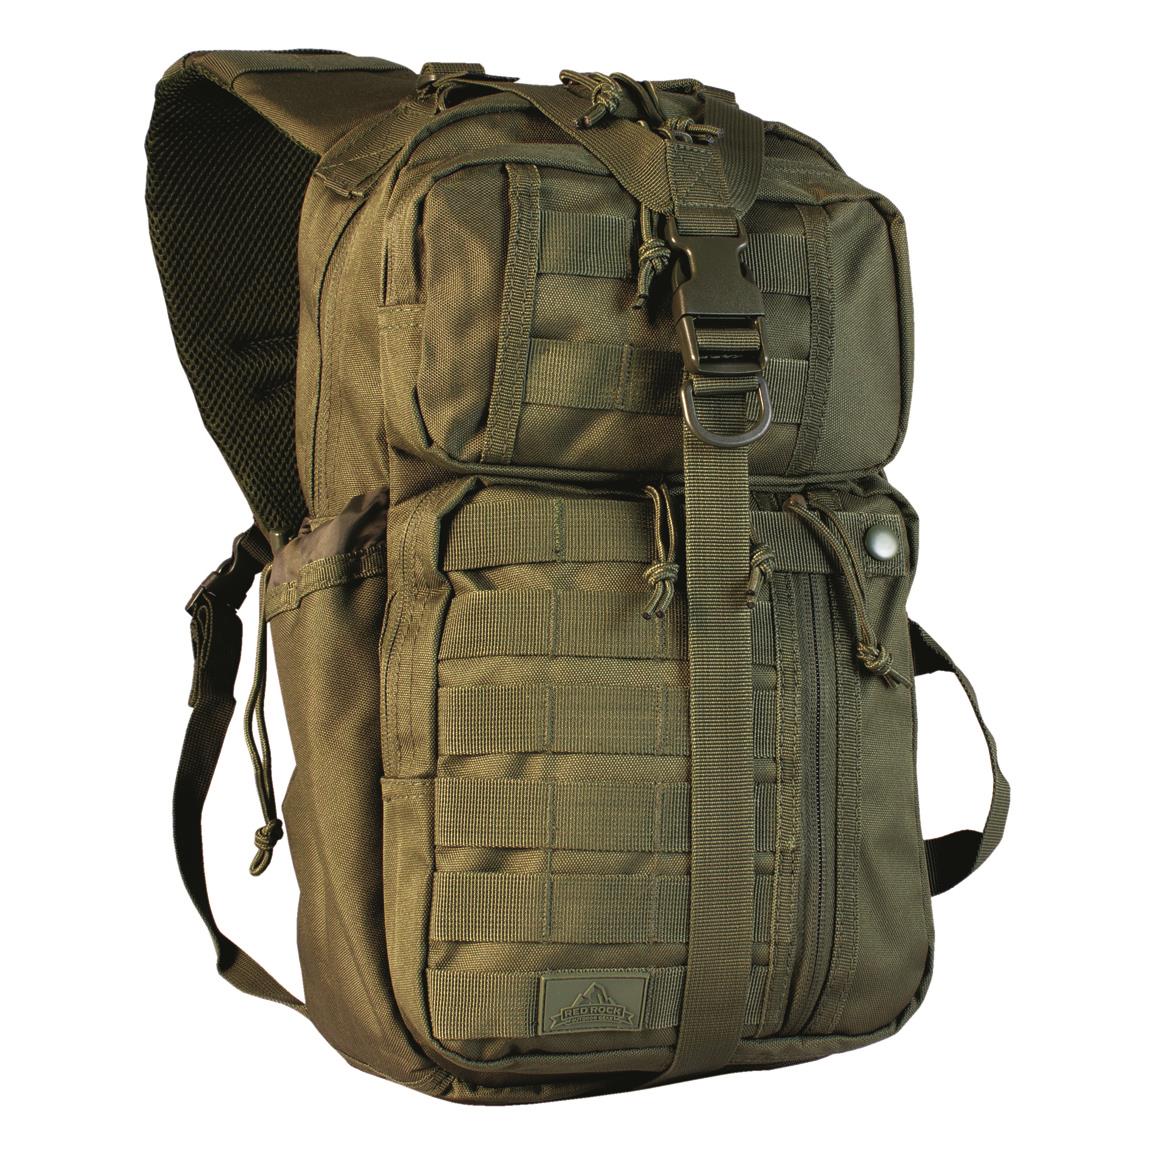 Large Assault Pack - 3 Day Tactical Bag - Red Rock Outdoor Gear